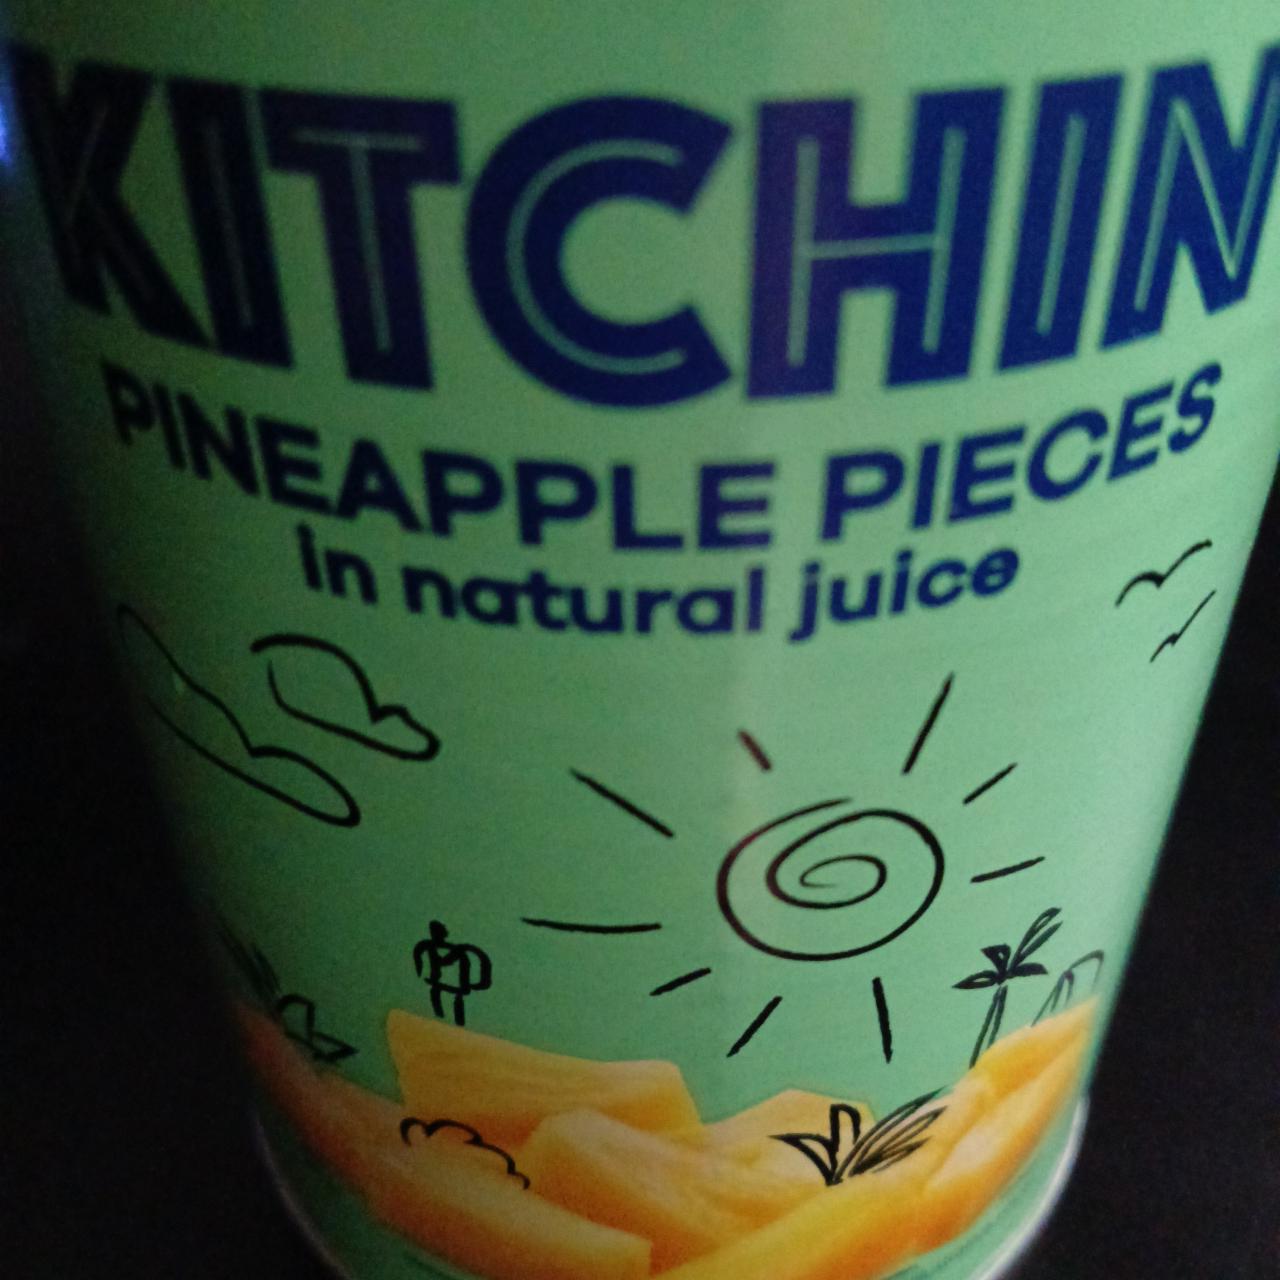 Fotografie - Pineapple pieces in natural juice Kitchin